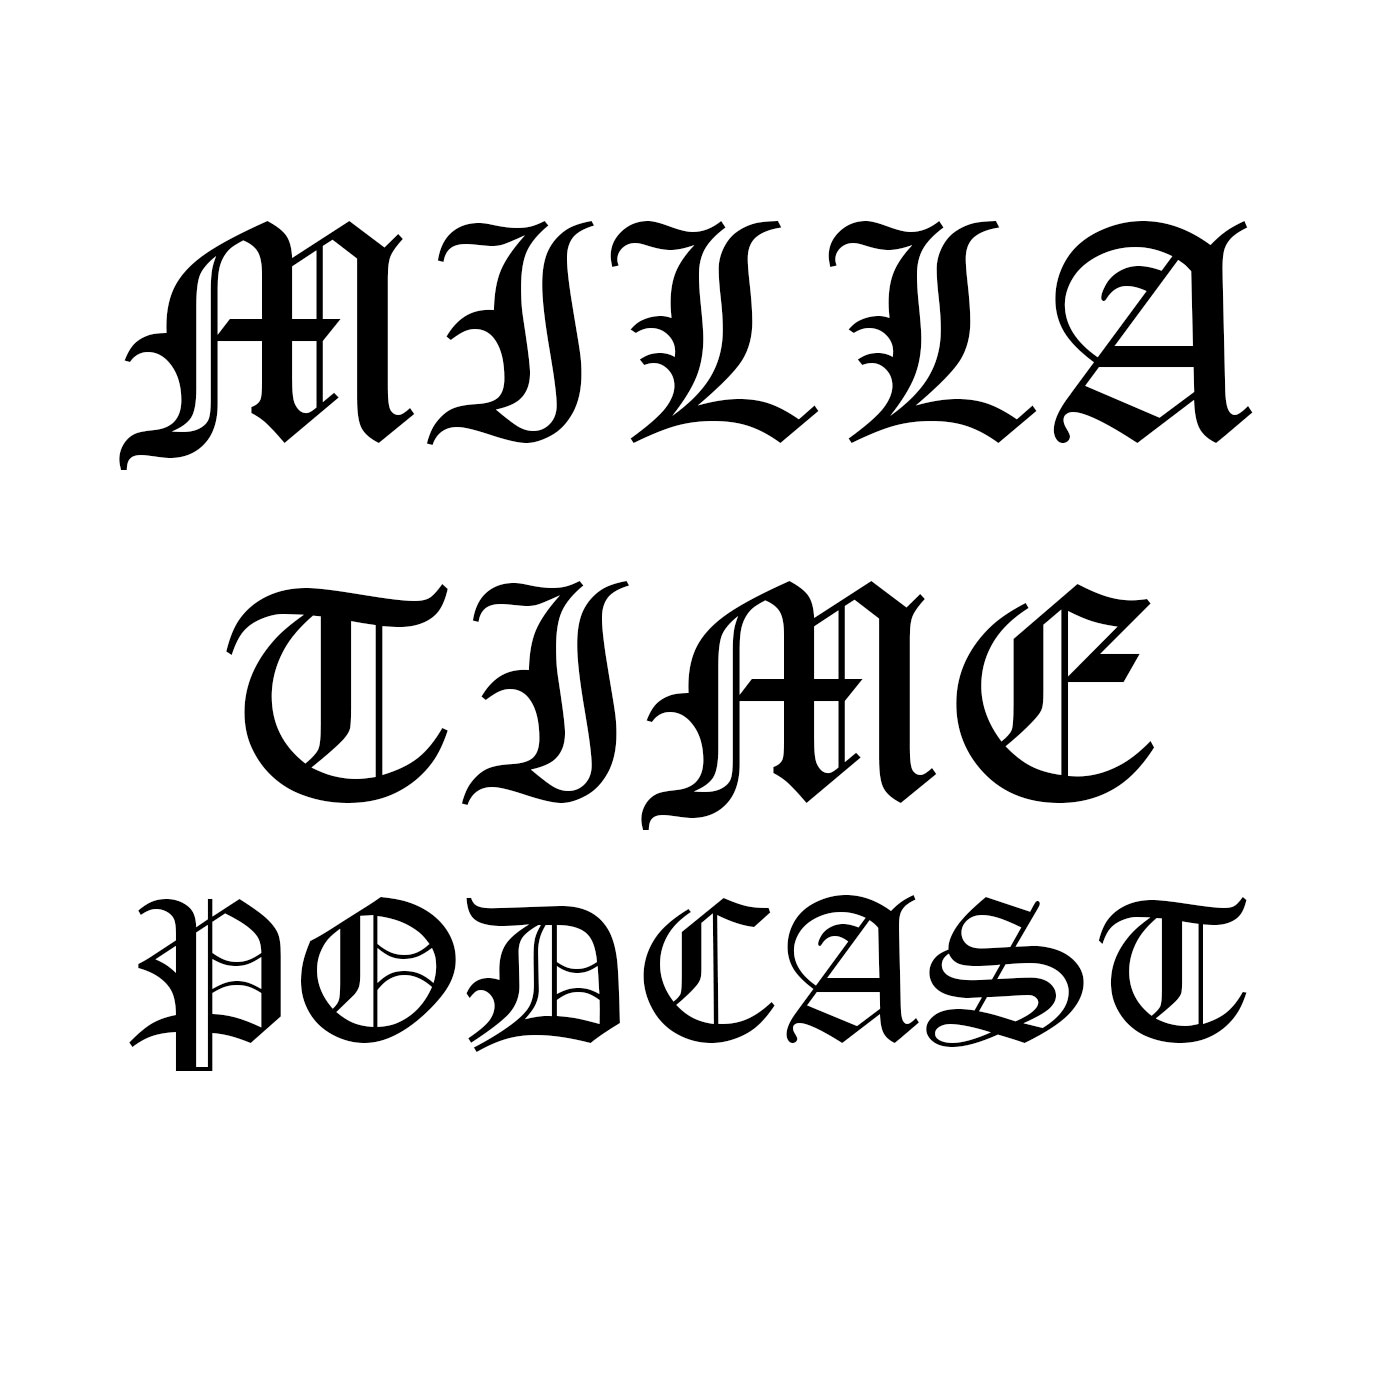 Milla time Podcast